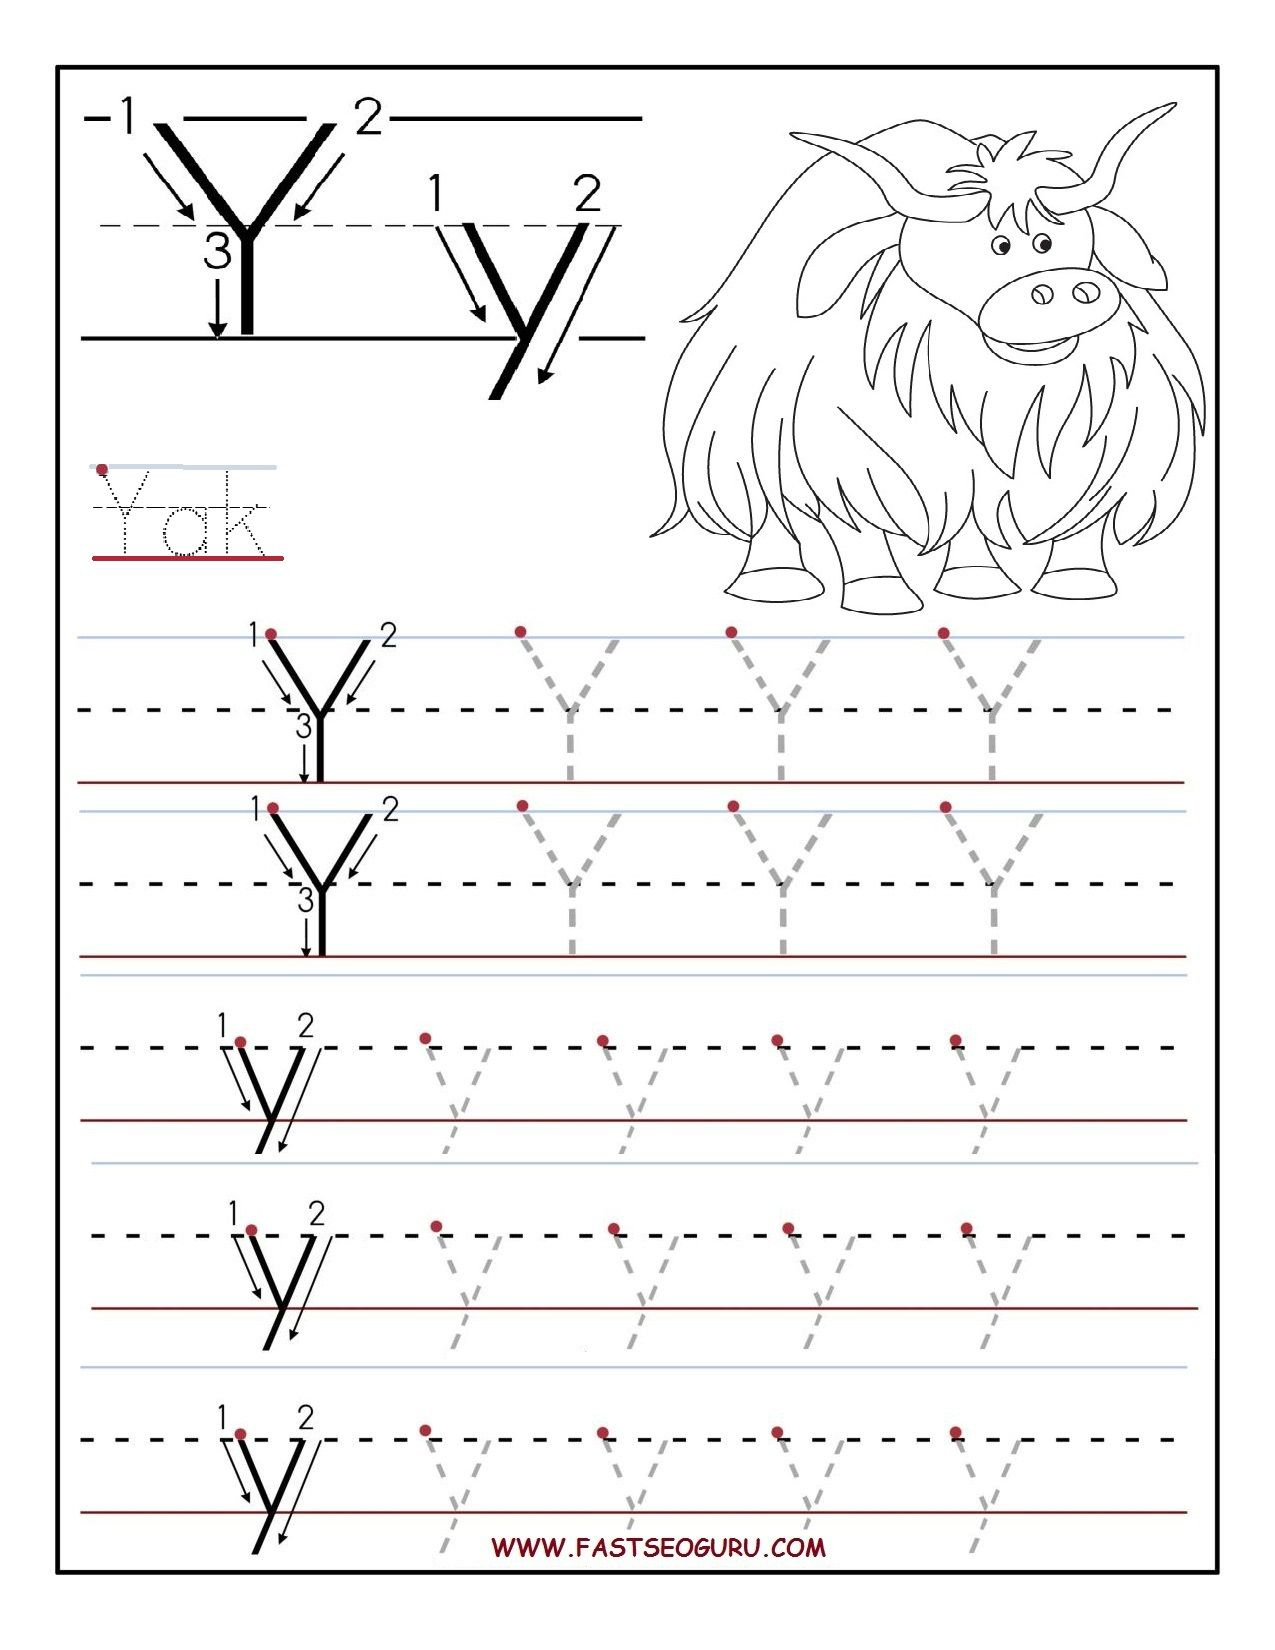 Printable Letter Y Tracing Worksheets For Preschool for Alphabet Tracing Letter Y